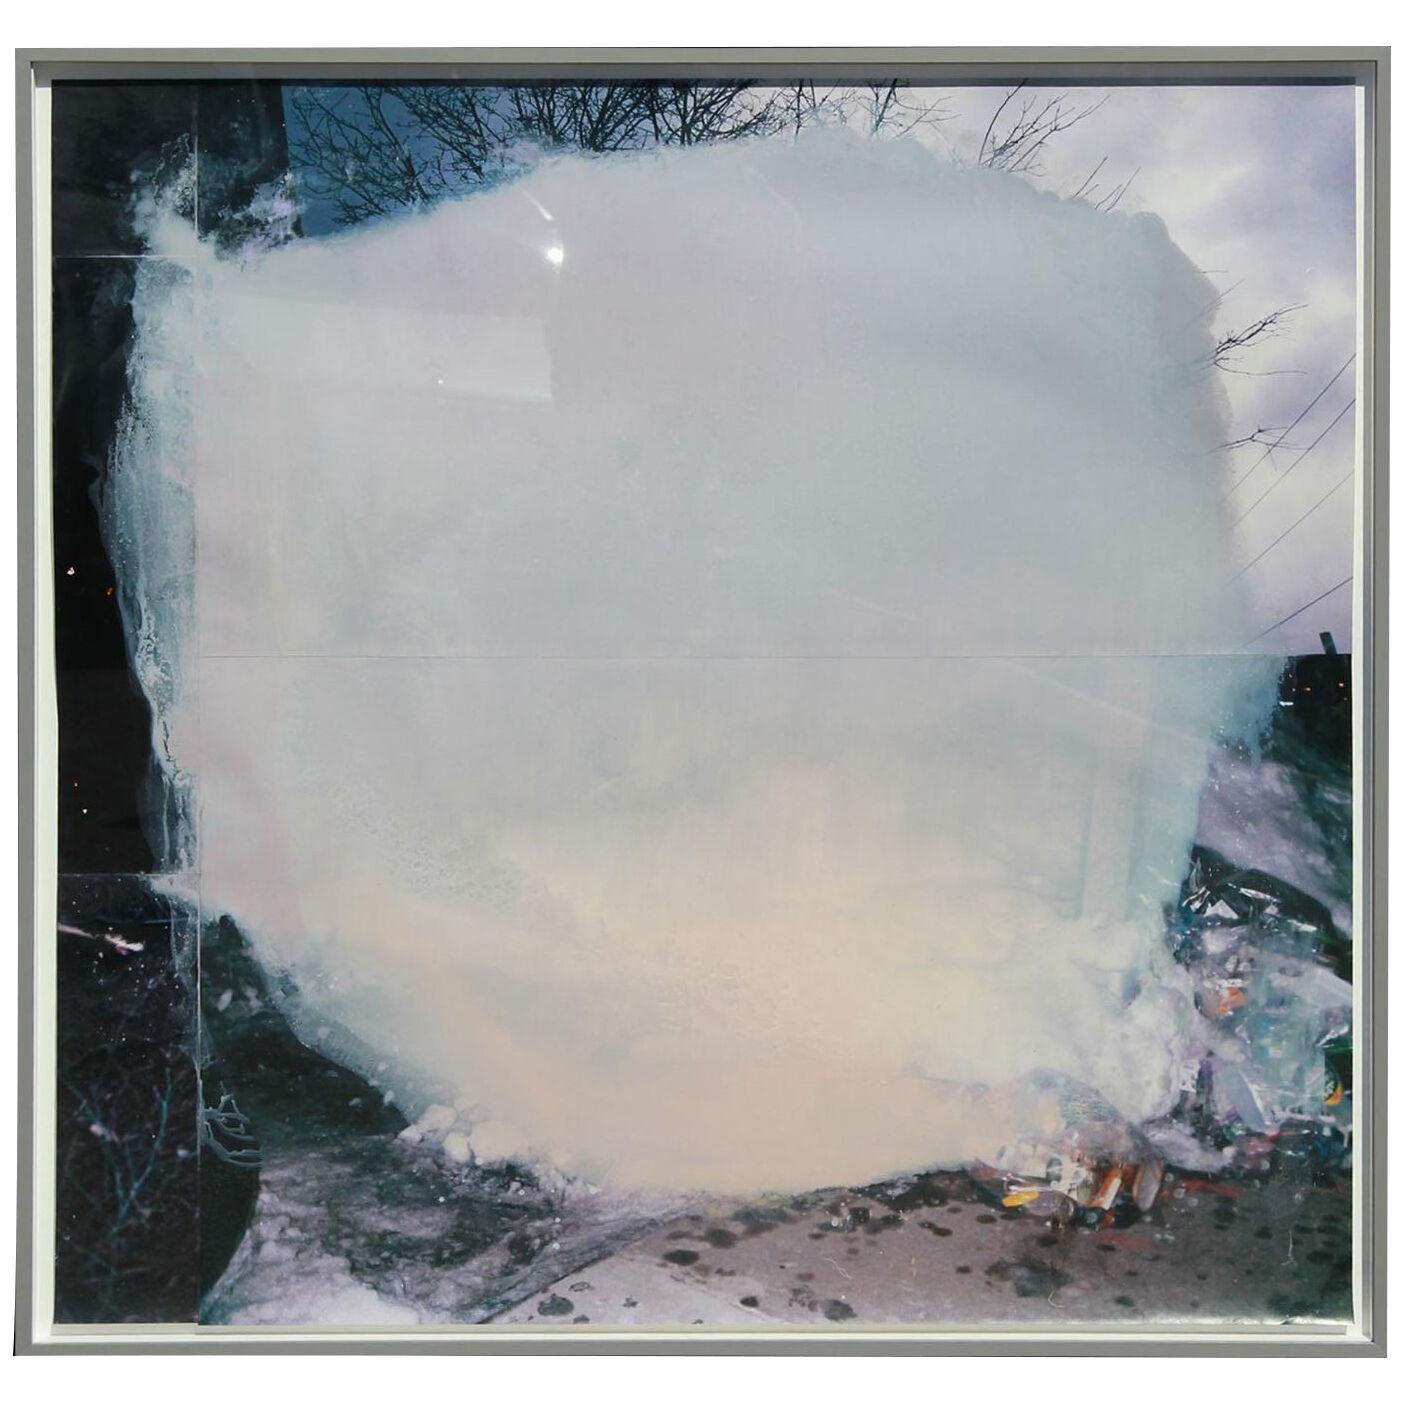 Claire Falkenberg "Winter" Abstract Painted Photograph Collage 2011